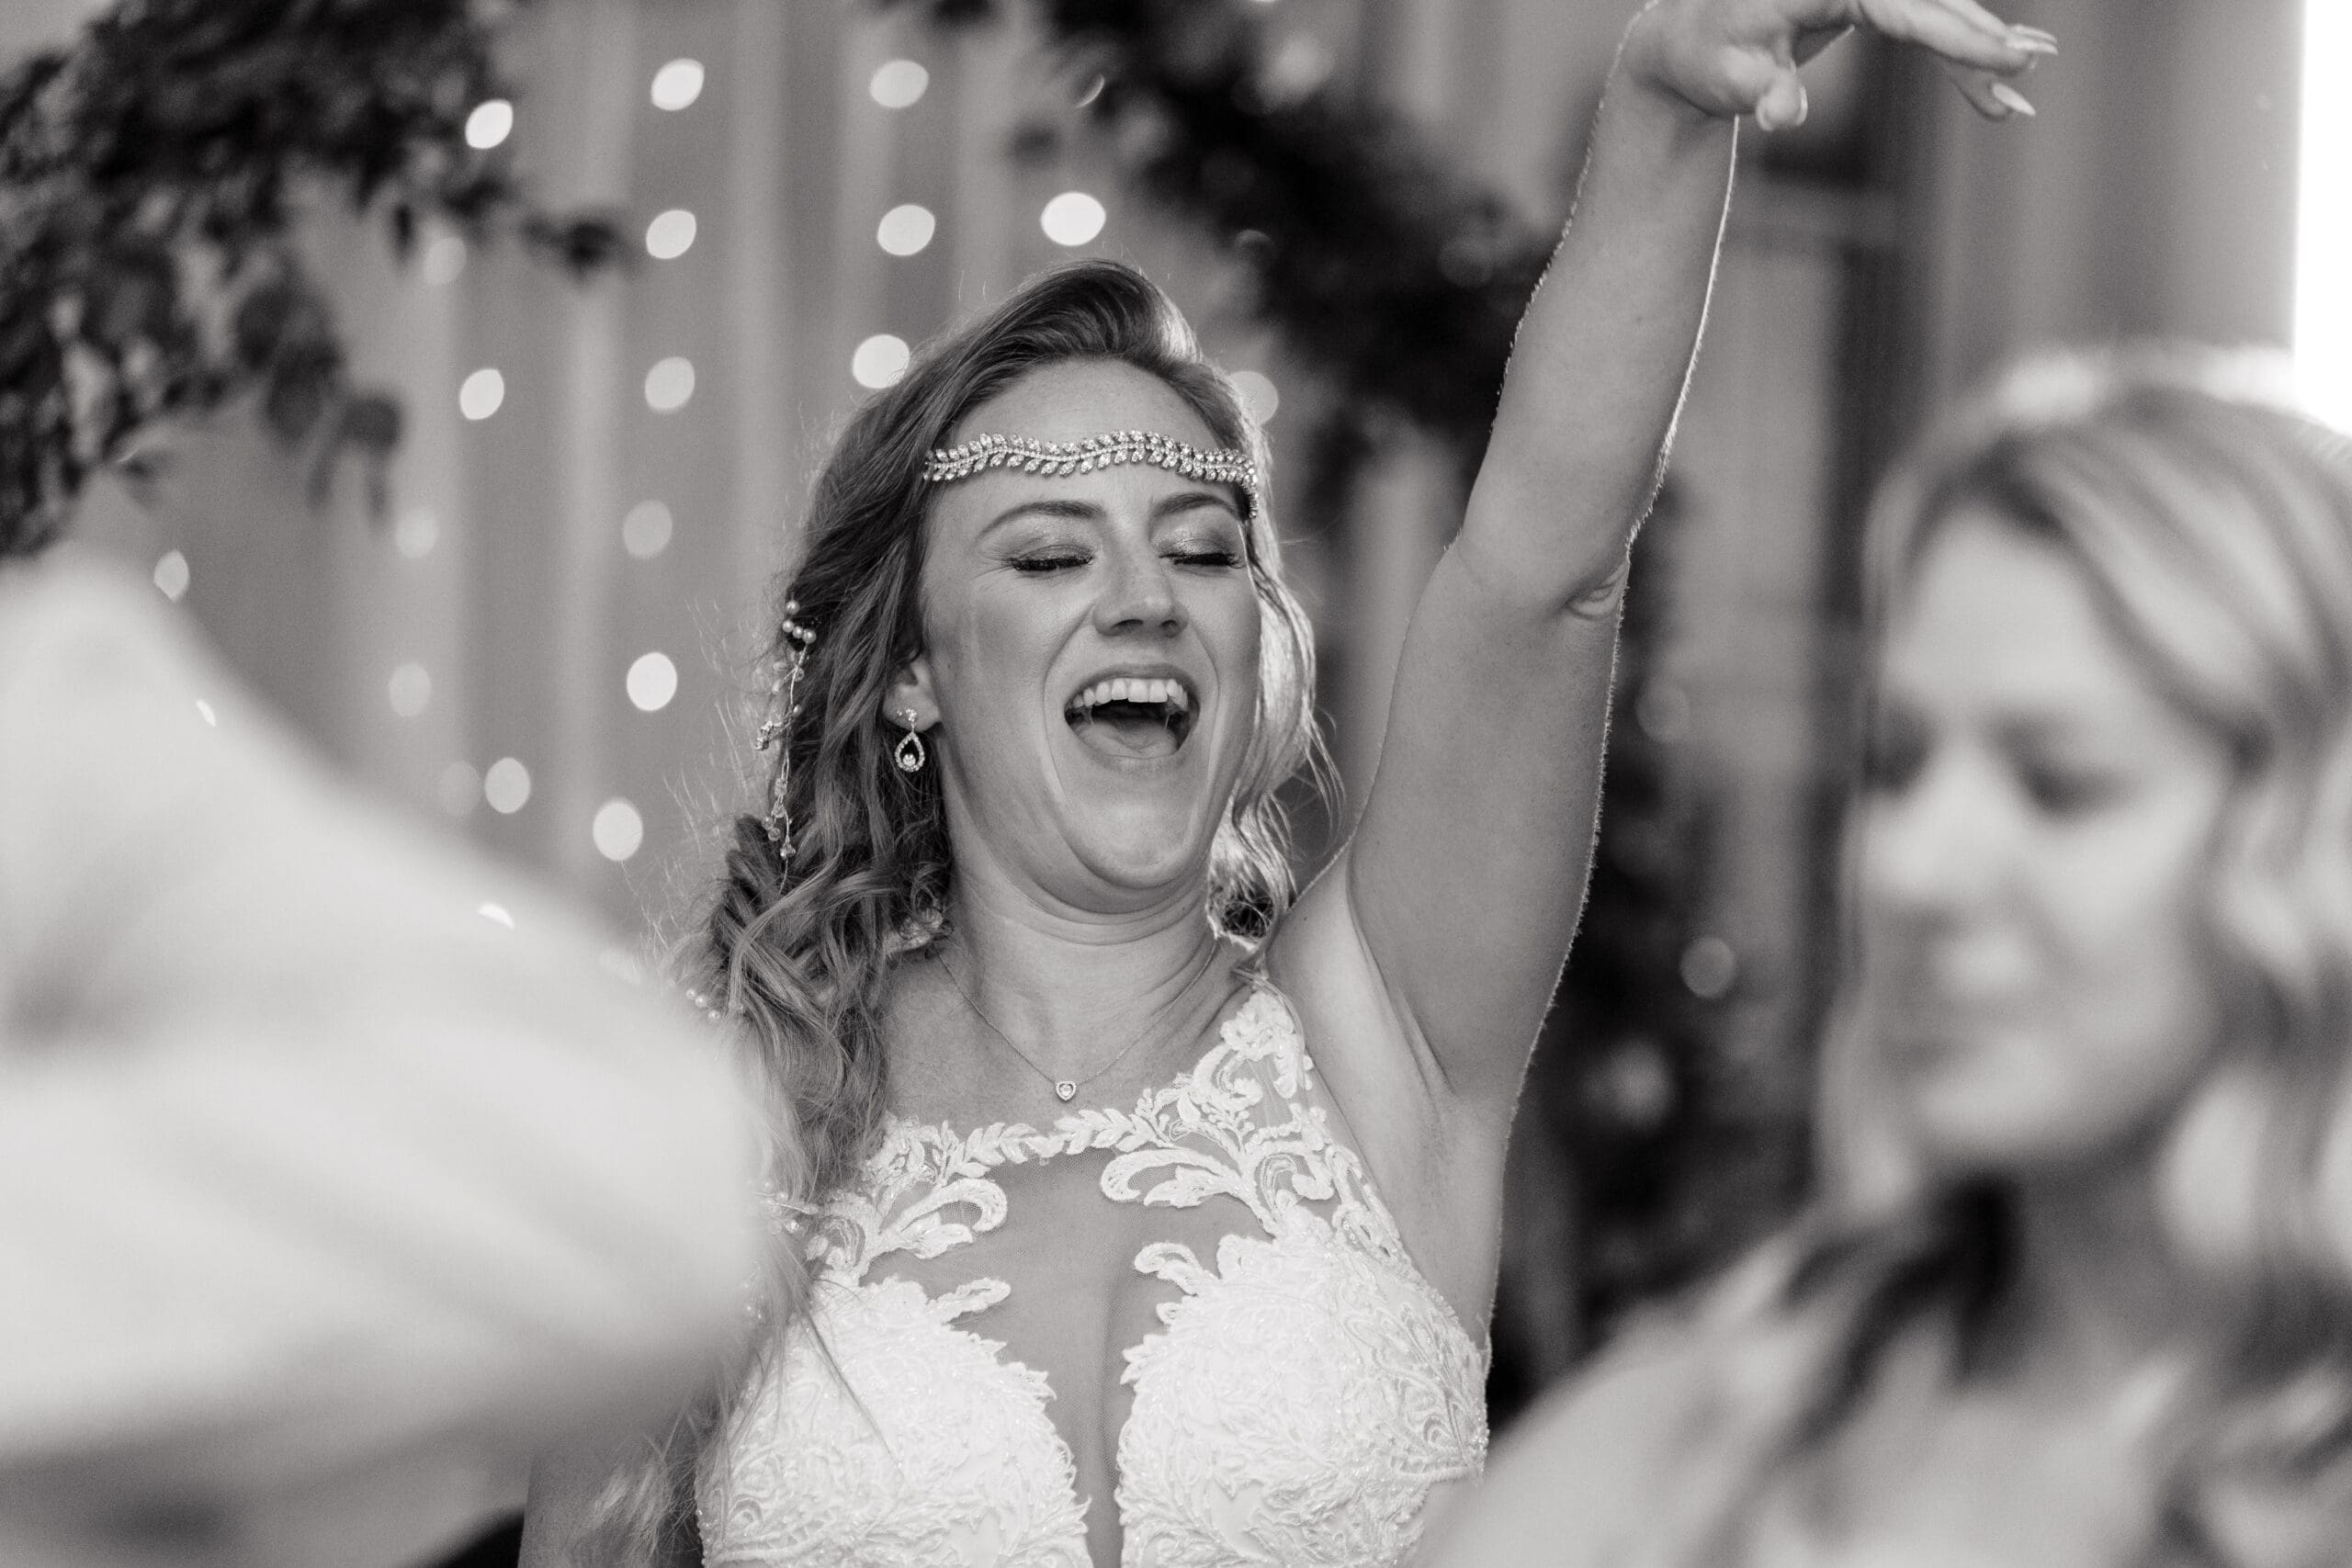 Black and white photo of Kristen having a great time at the wedding reception.